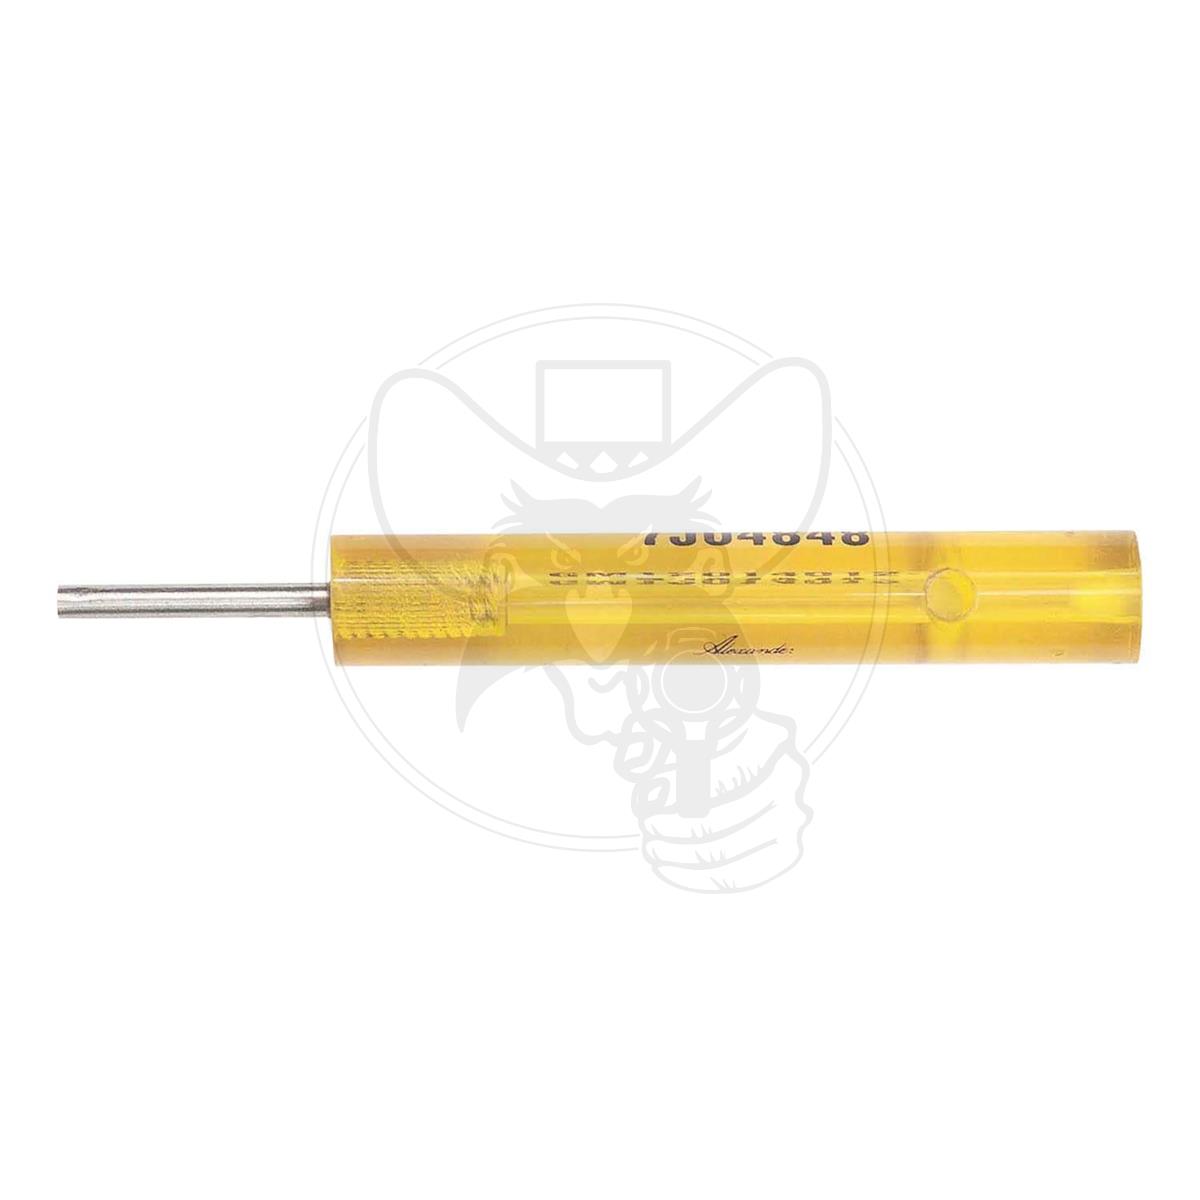 MSD PIN EXTRACTION TOOL FOR WATERTIGHT CONNECTIONS